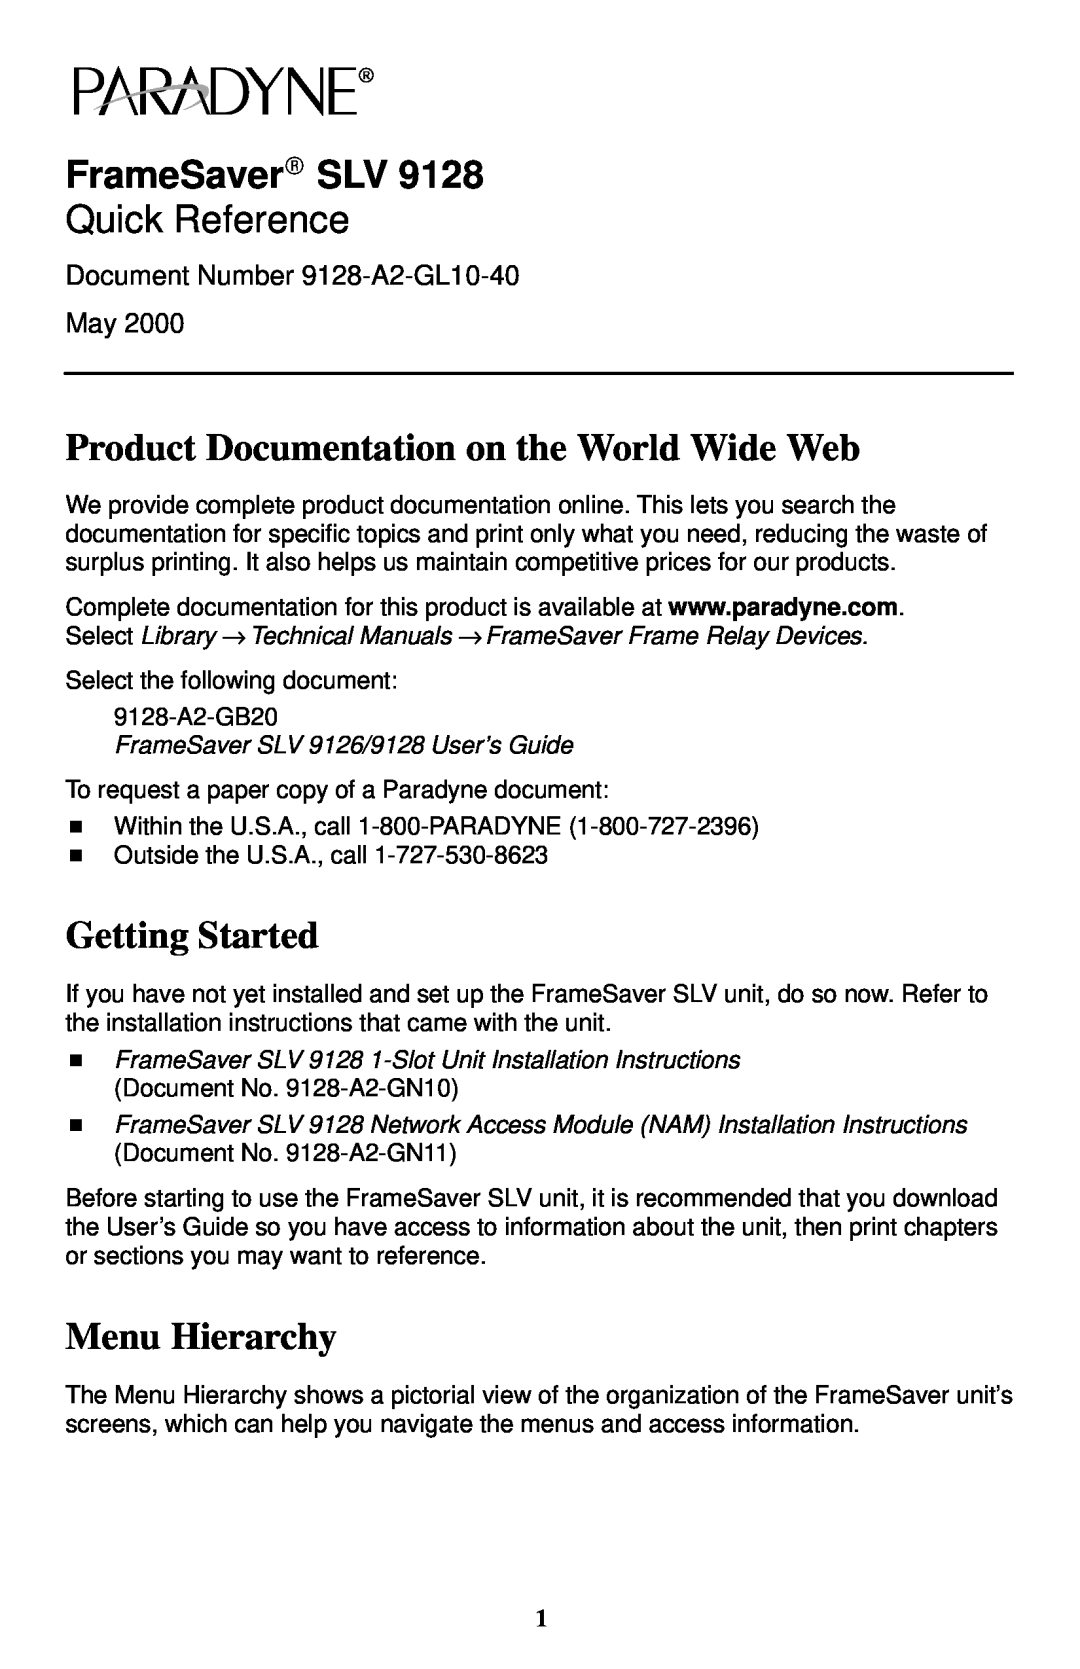 Paradyne Paradyne FrameSaver technical manual Product Documentation on the World Wide Web, Getting Started, Menu Hierarchy 